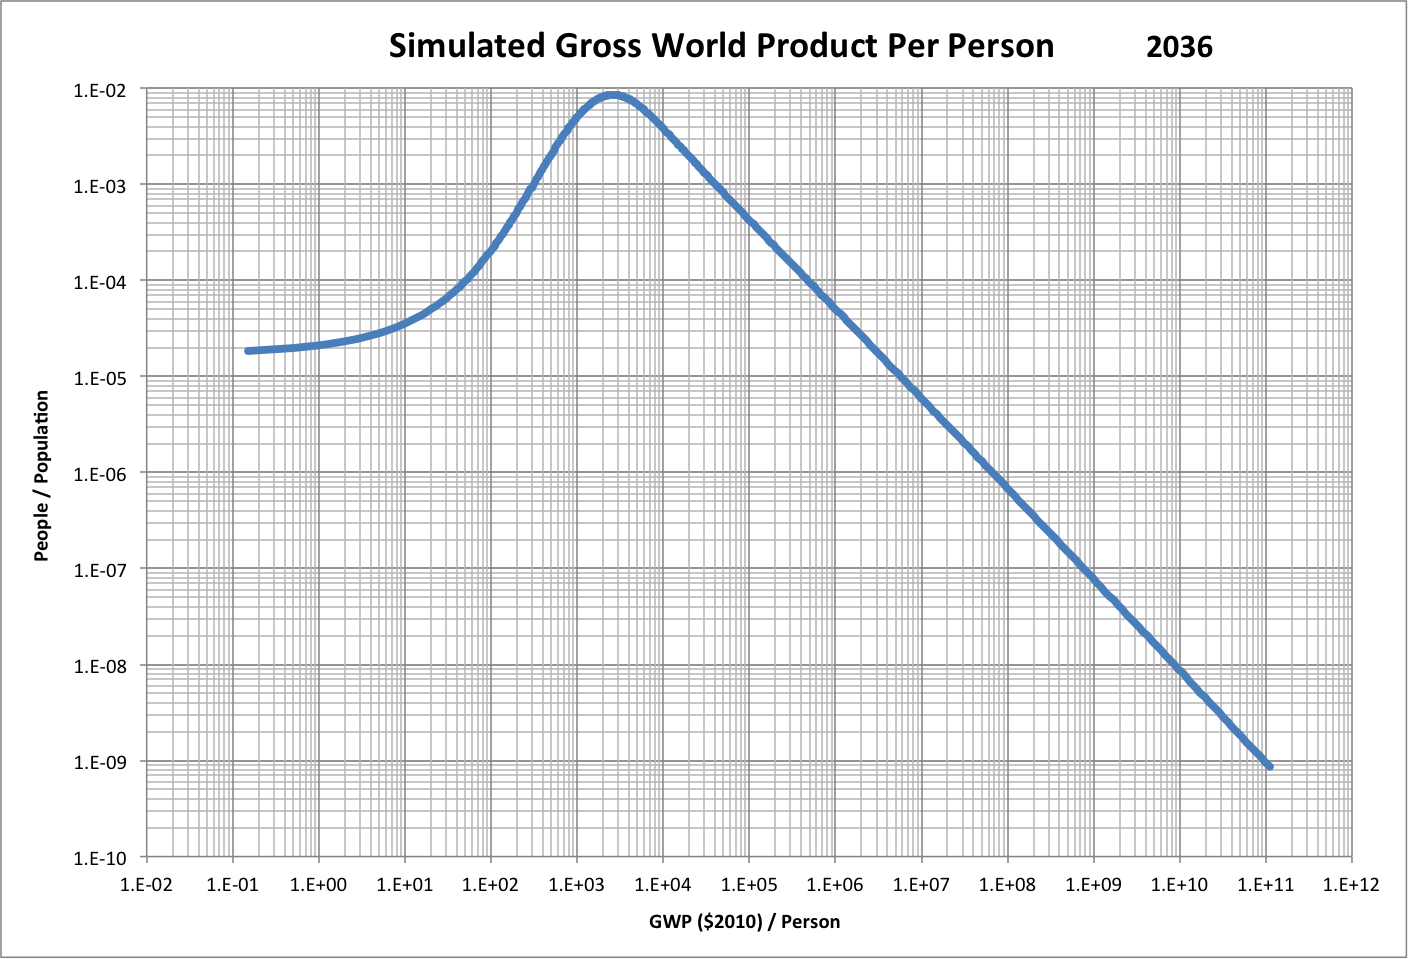 Population Frequency of GWP/person